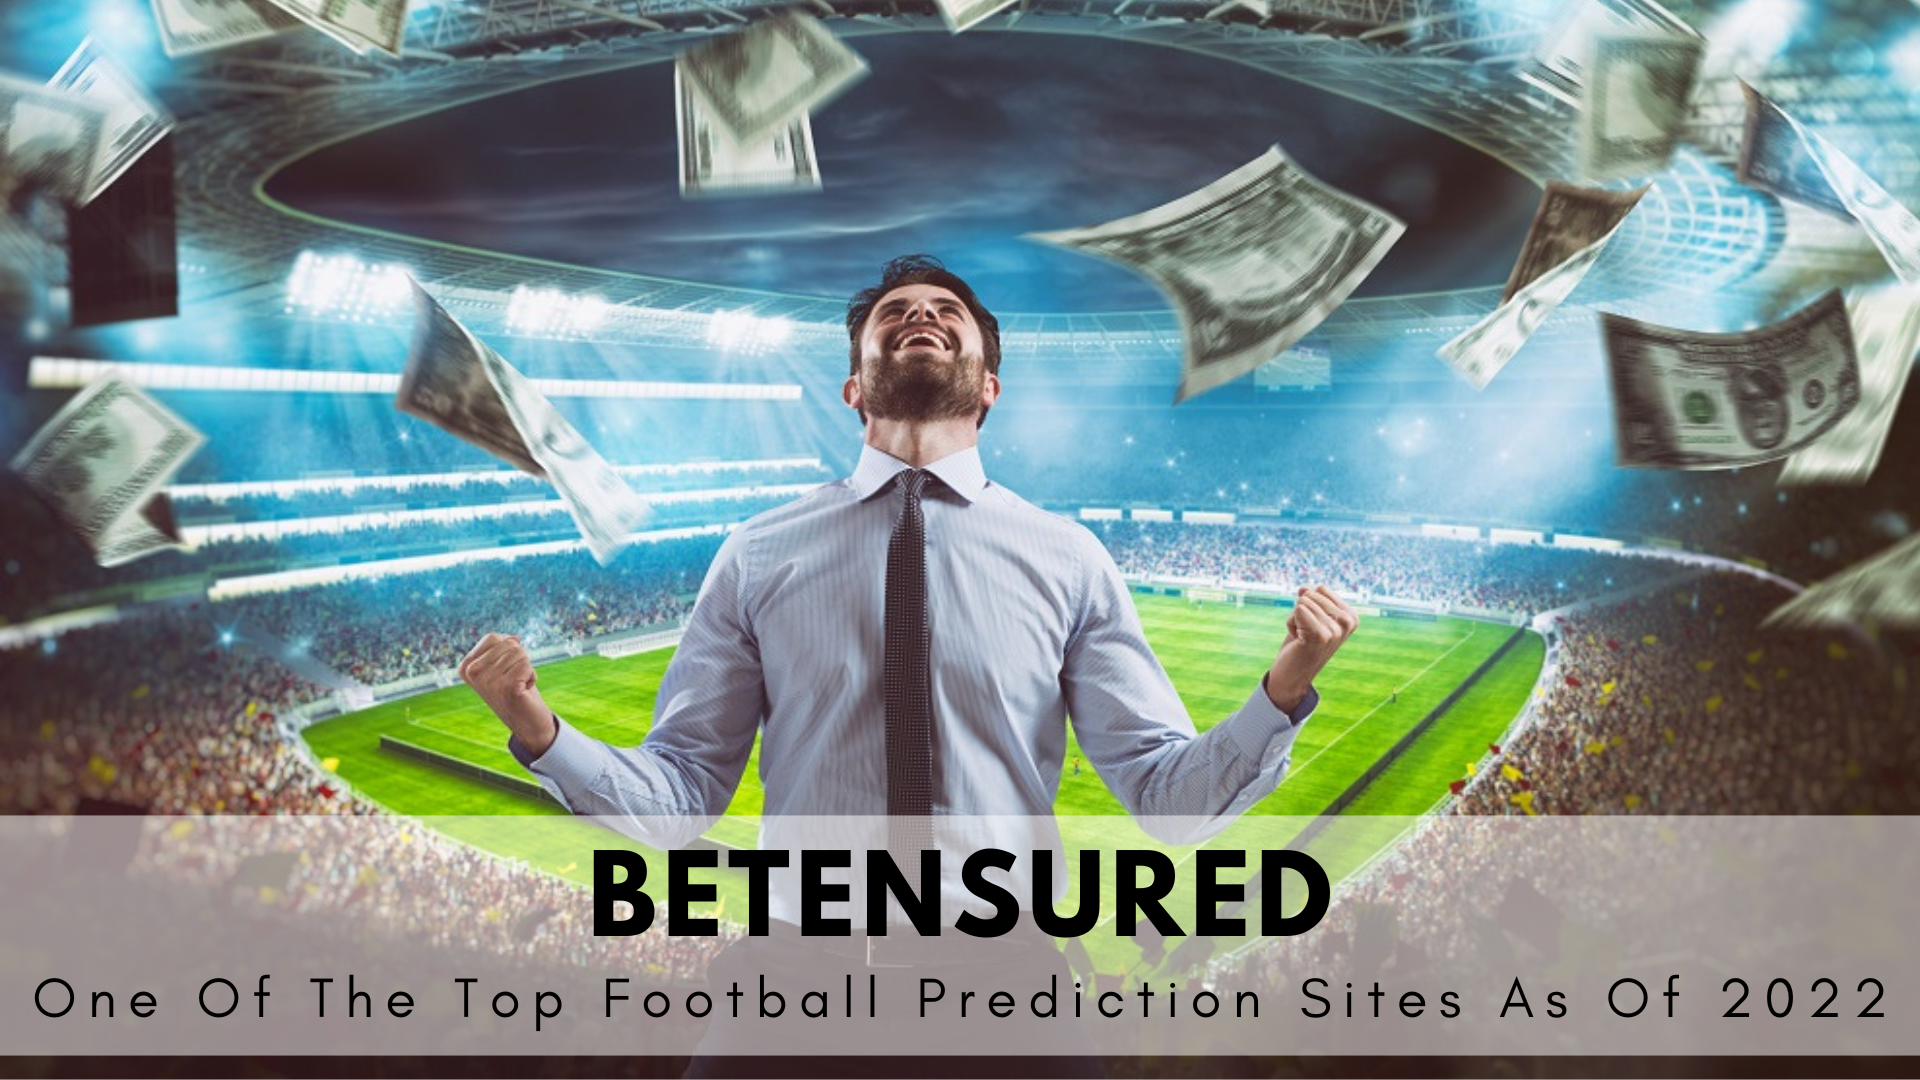 Betensured - One Of The Top Football Prediction Sites As Of 2022